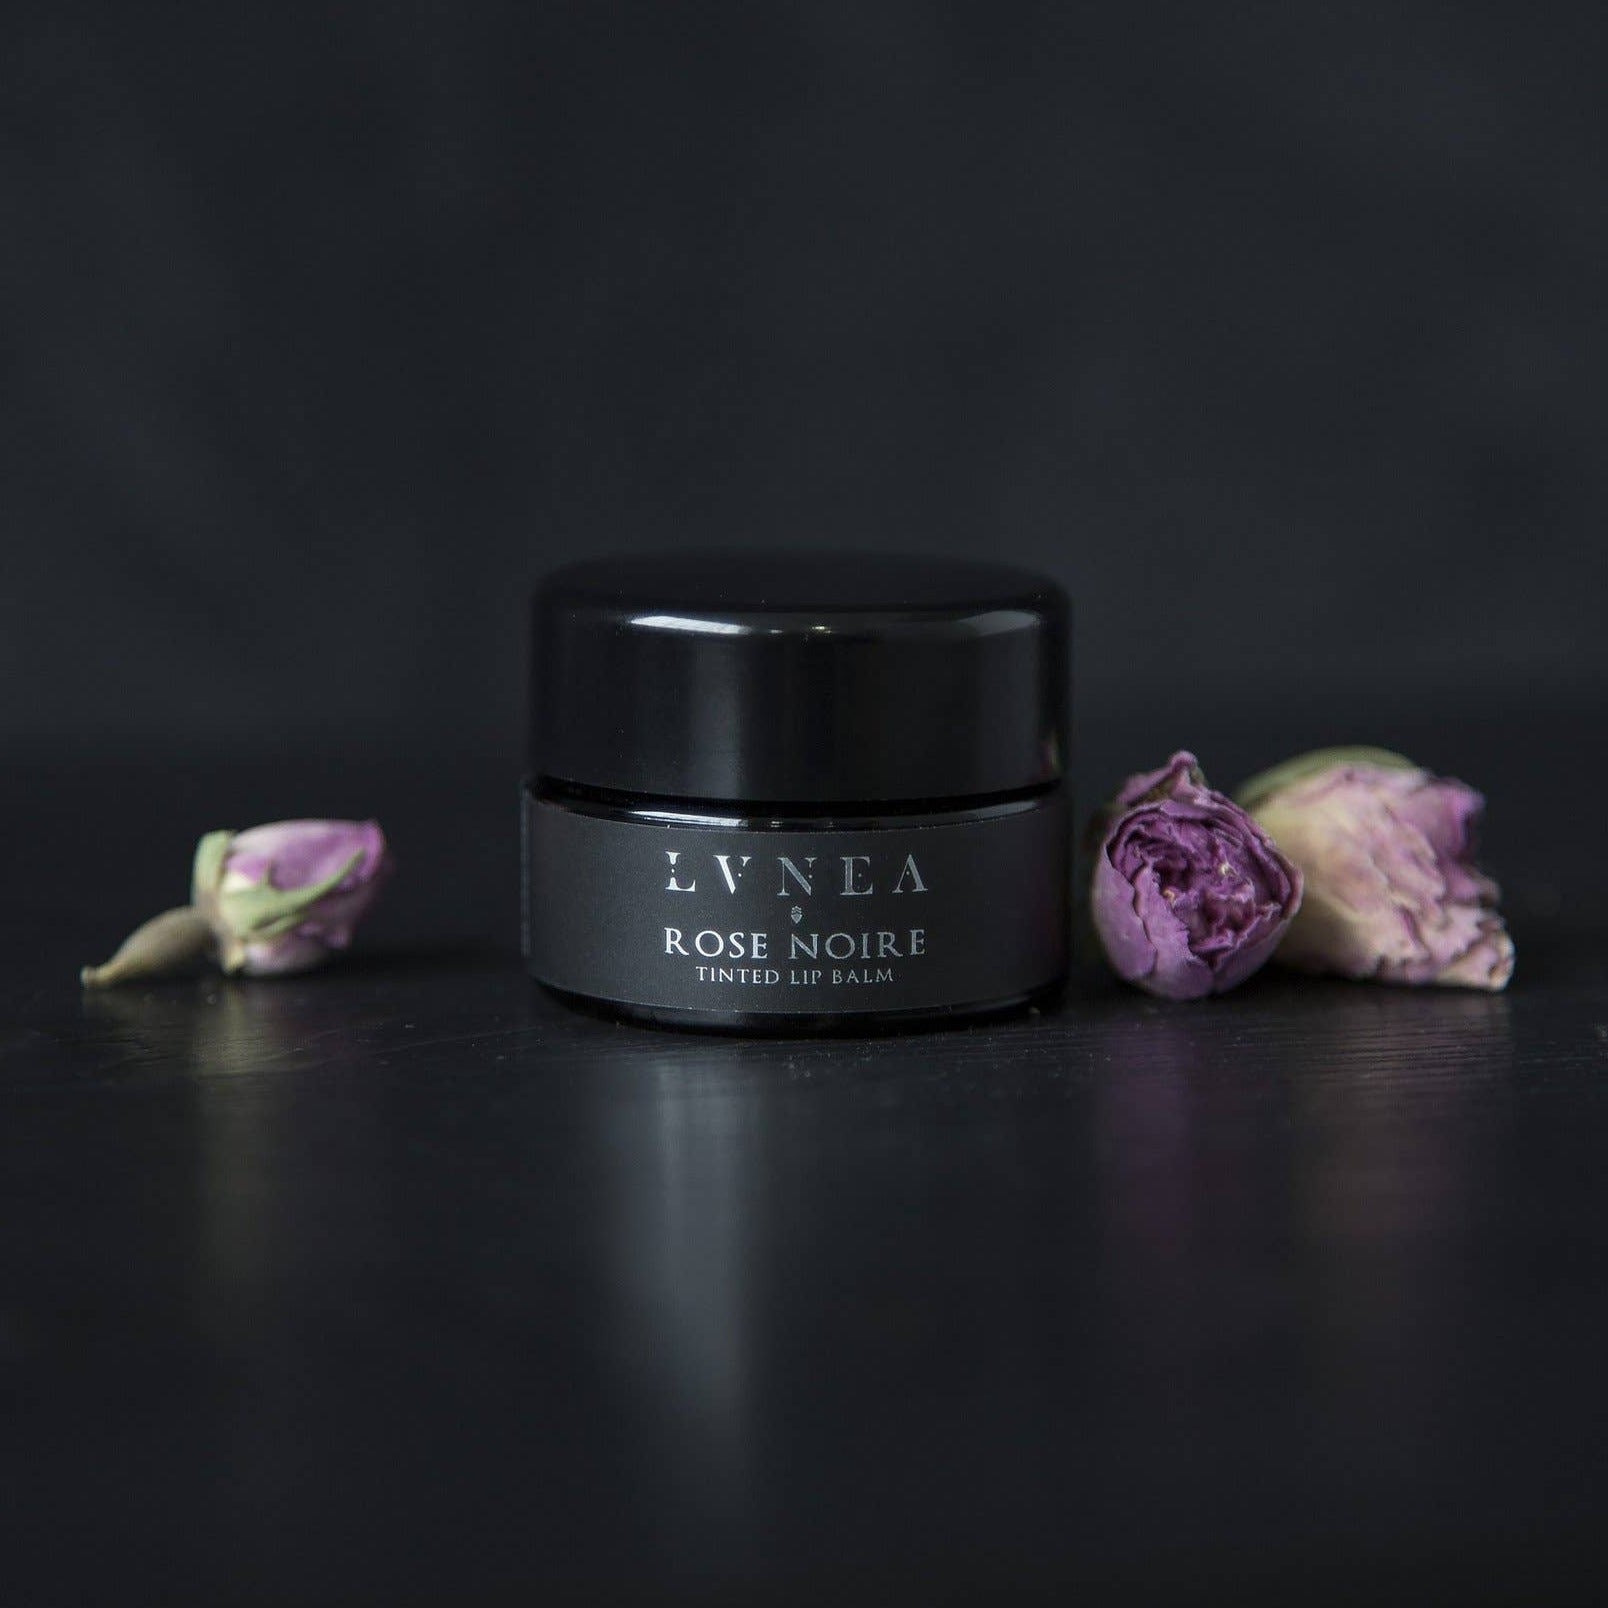 Rose Noire tinted lip balm by Lvnea in a black glass small jar. Rose scented tinted lip balm. 